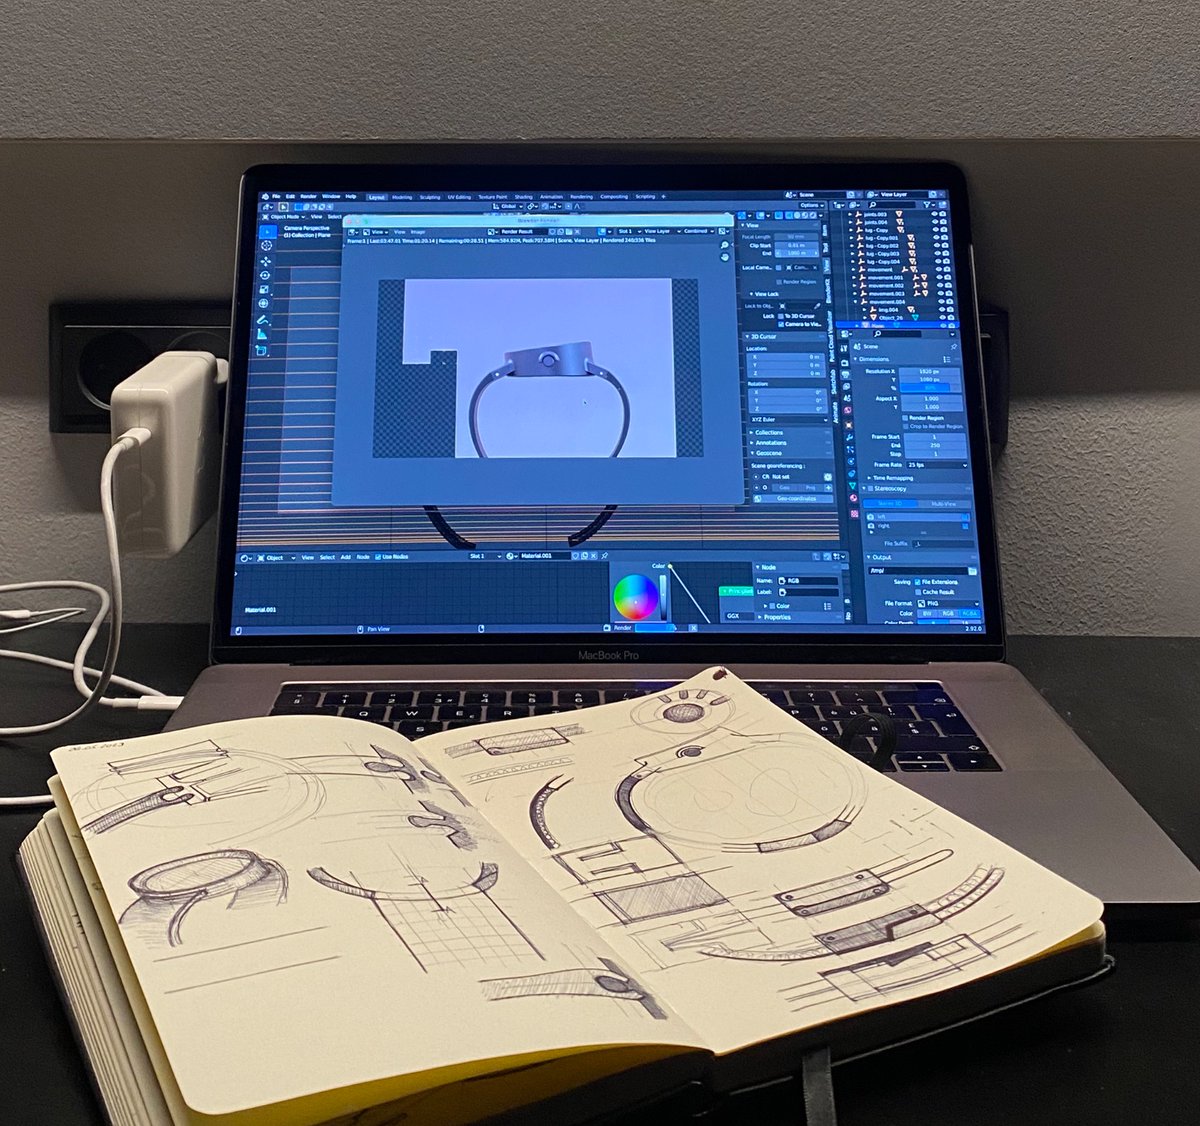 Throwback to an early stage of the design process

#prototype #watch #IndustrialDesign #WatchDesign #3DPrinting #Prototypes #Sketches #WatchPrototype #3DPrinted #DesignDrawings #PrototypeDesign #DesignSketches #blender #blender3d #BlenderSoftware